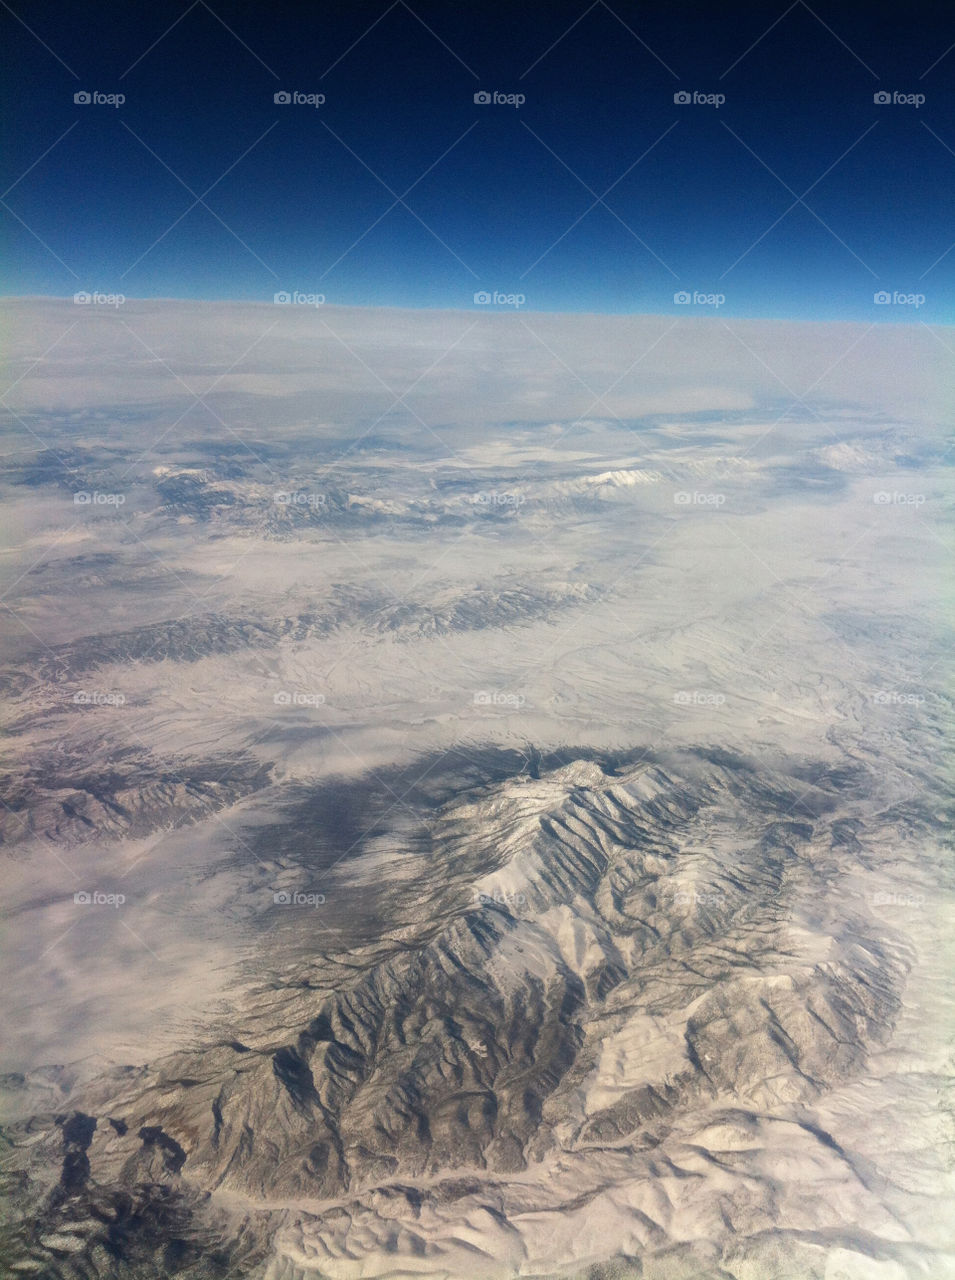 Taken above the skies somewhere over the rockies.